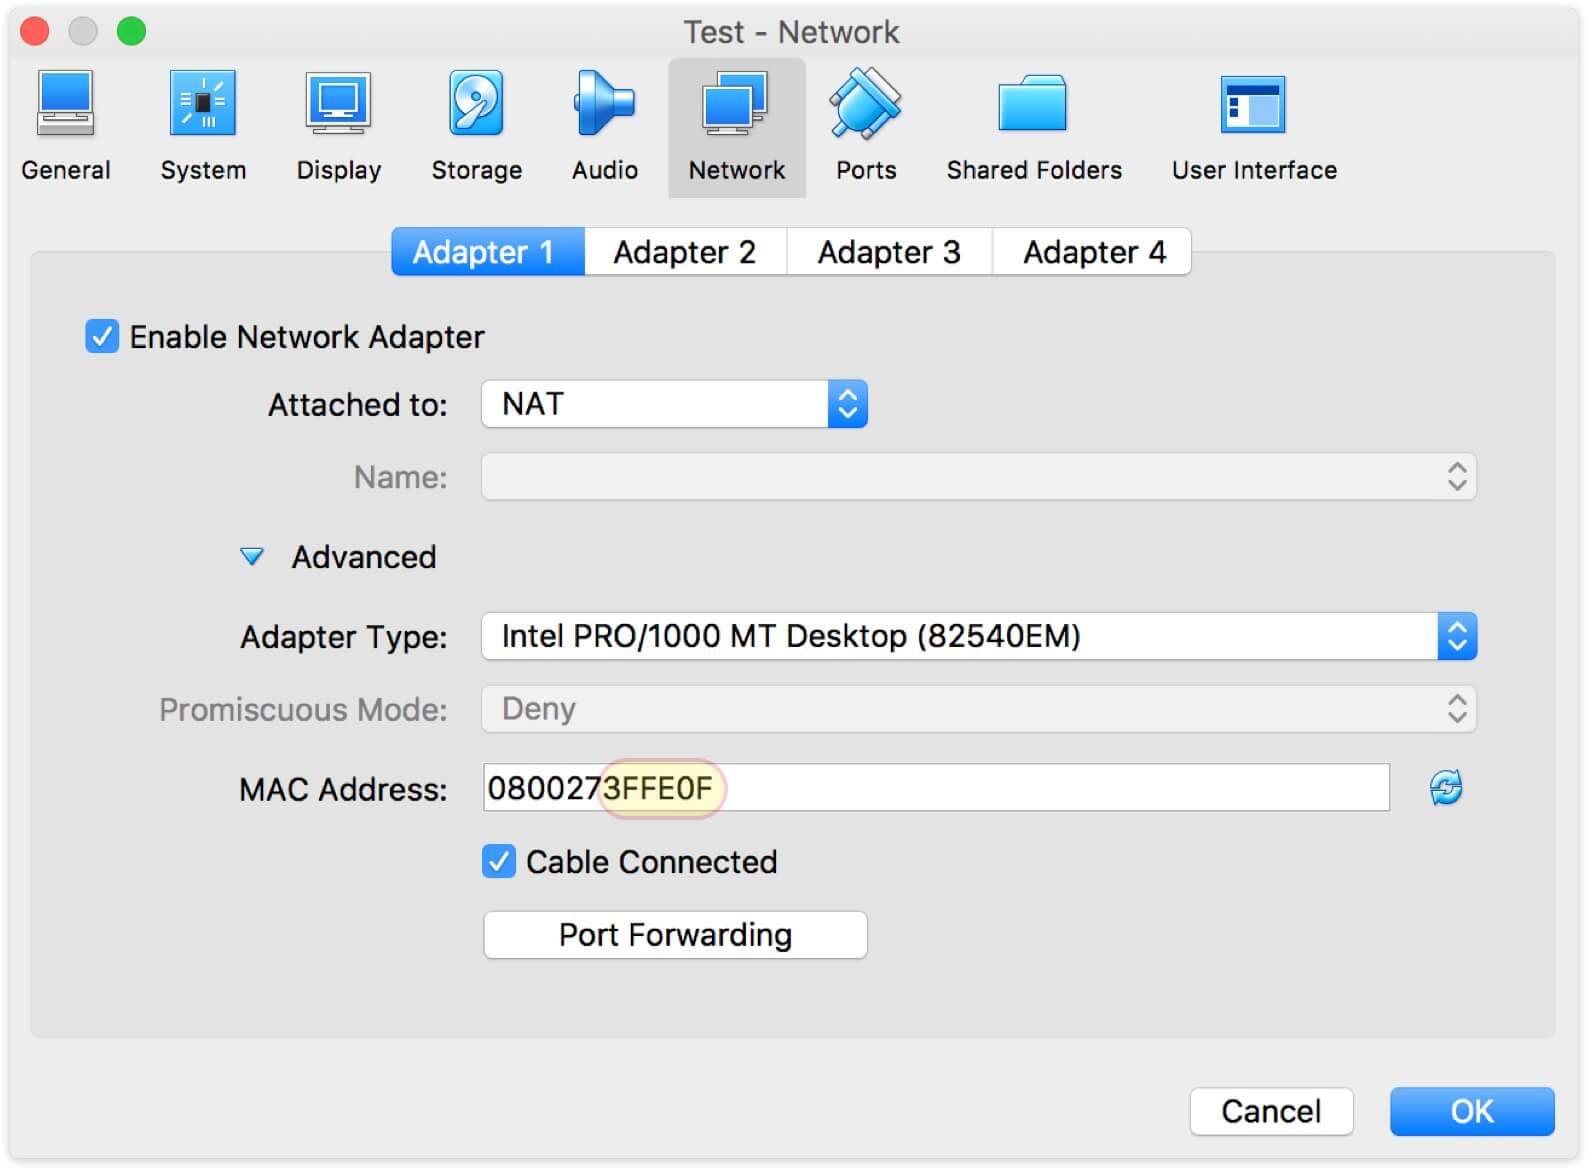 Once new VM has been created with the VirtualBox GUI, it has a MAC address with OUI prefix set automatically.